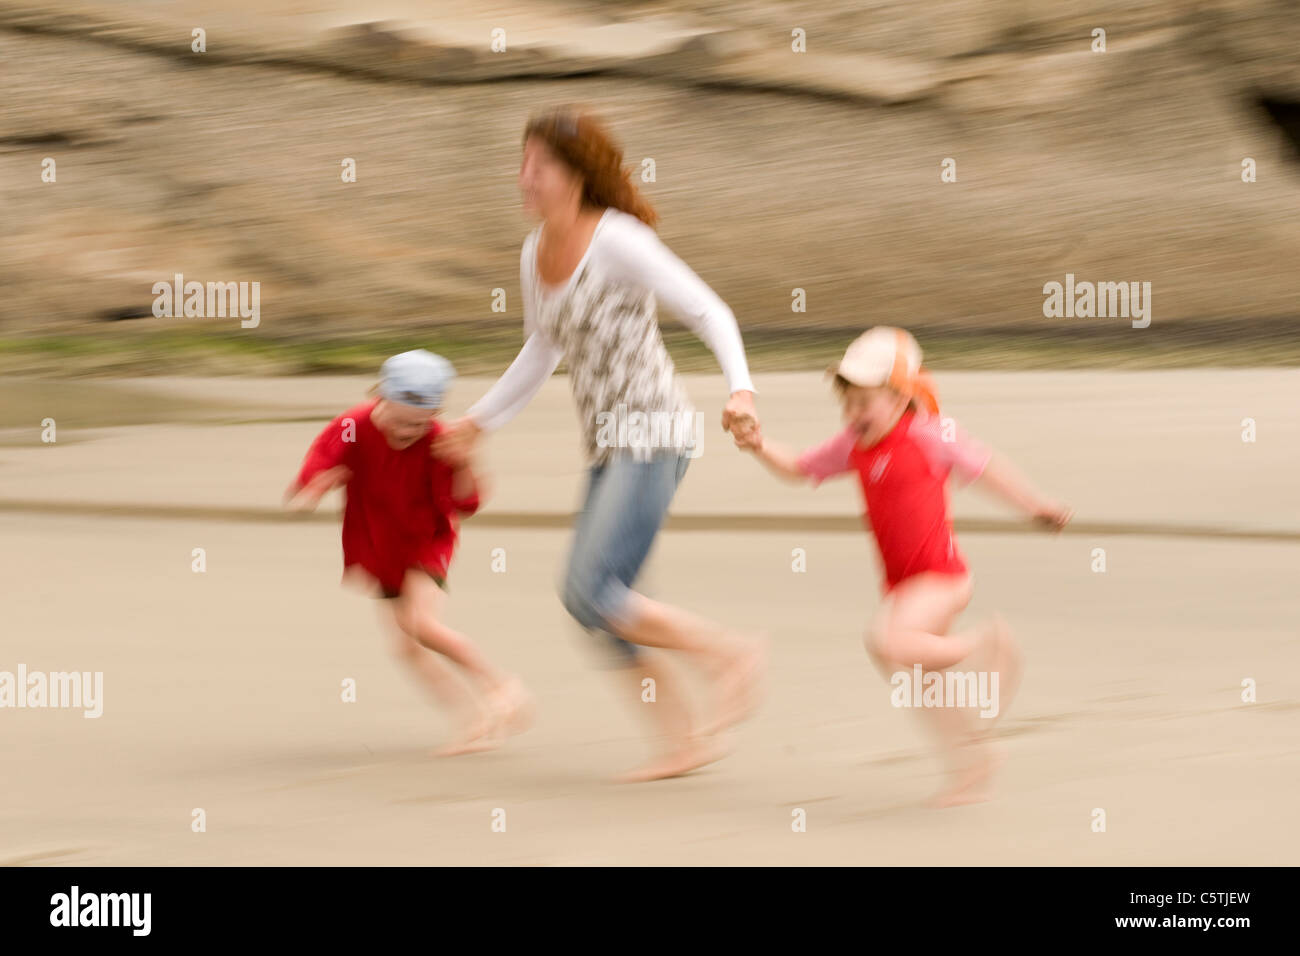 New Zealand, Cape Farewell, Woman with children (4-5) (6-7) on the beach, having fun Stock Photo